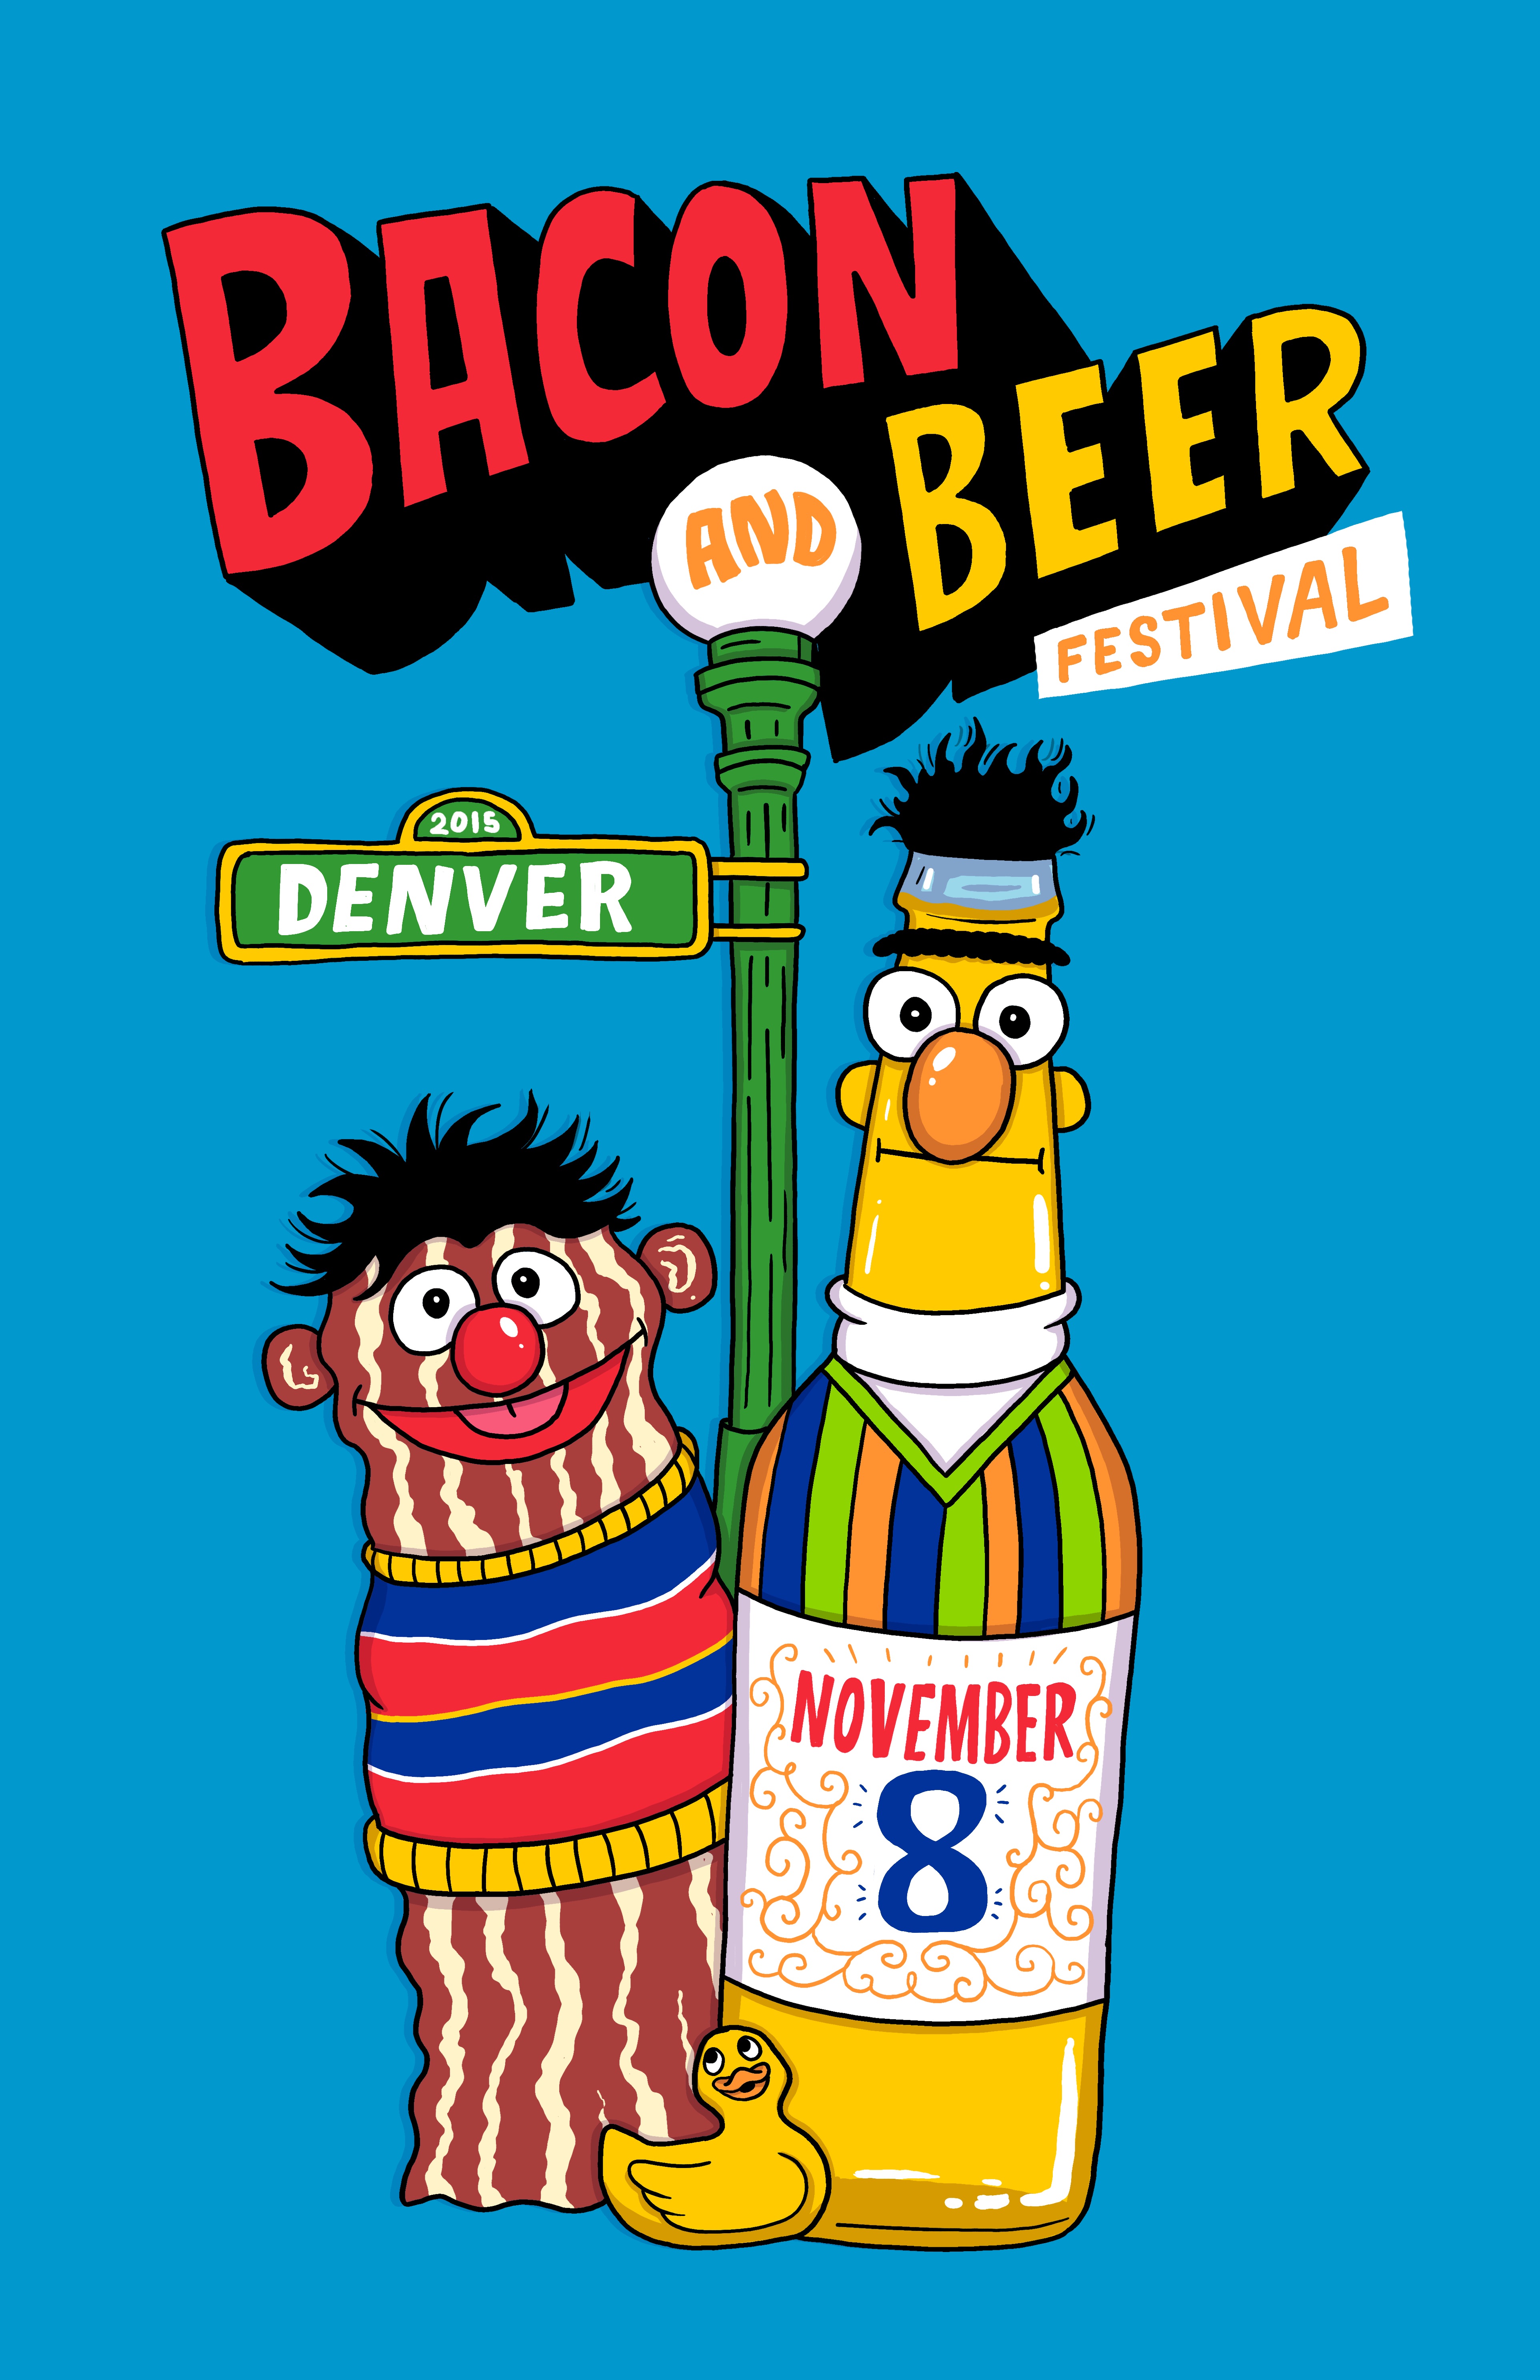 Denver Bacon and Beer Festival Returns for Fourth Year